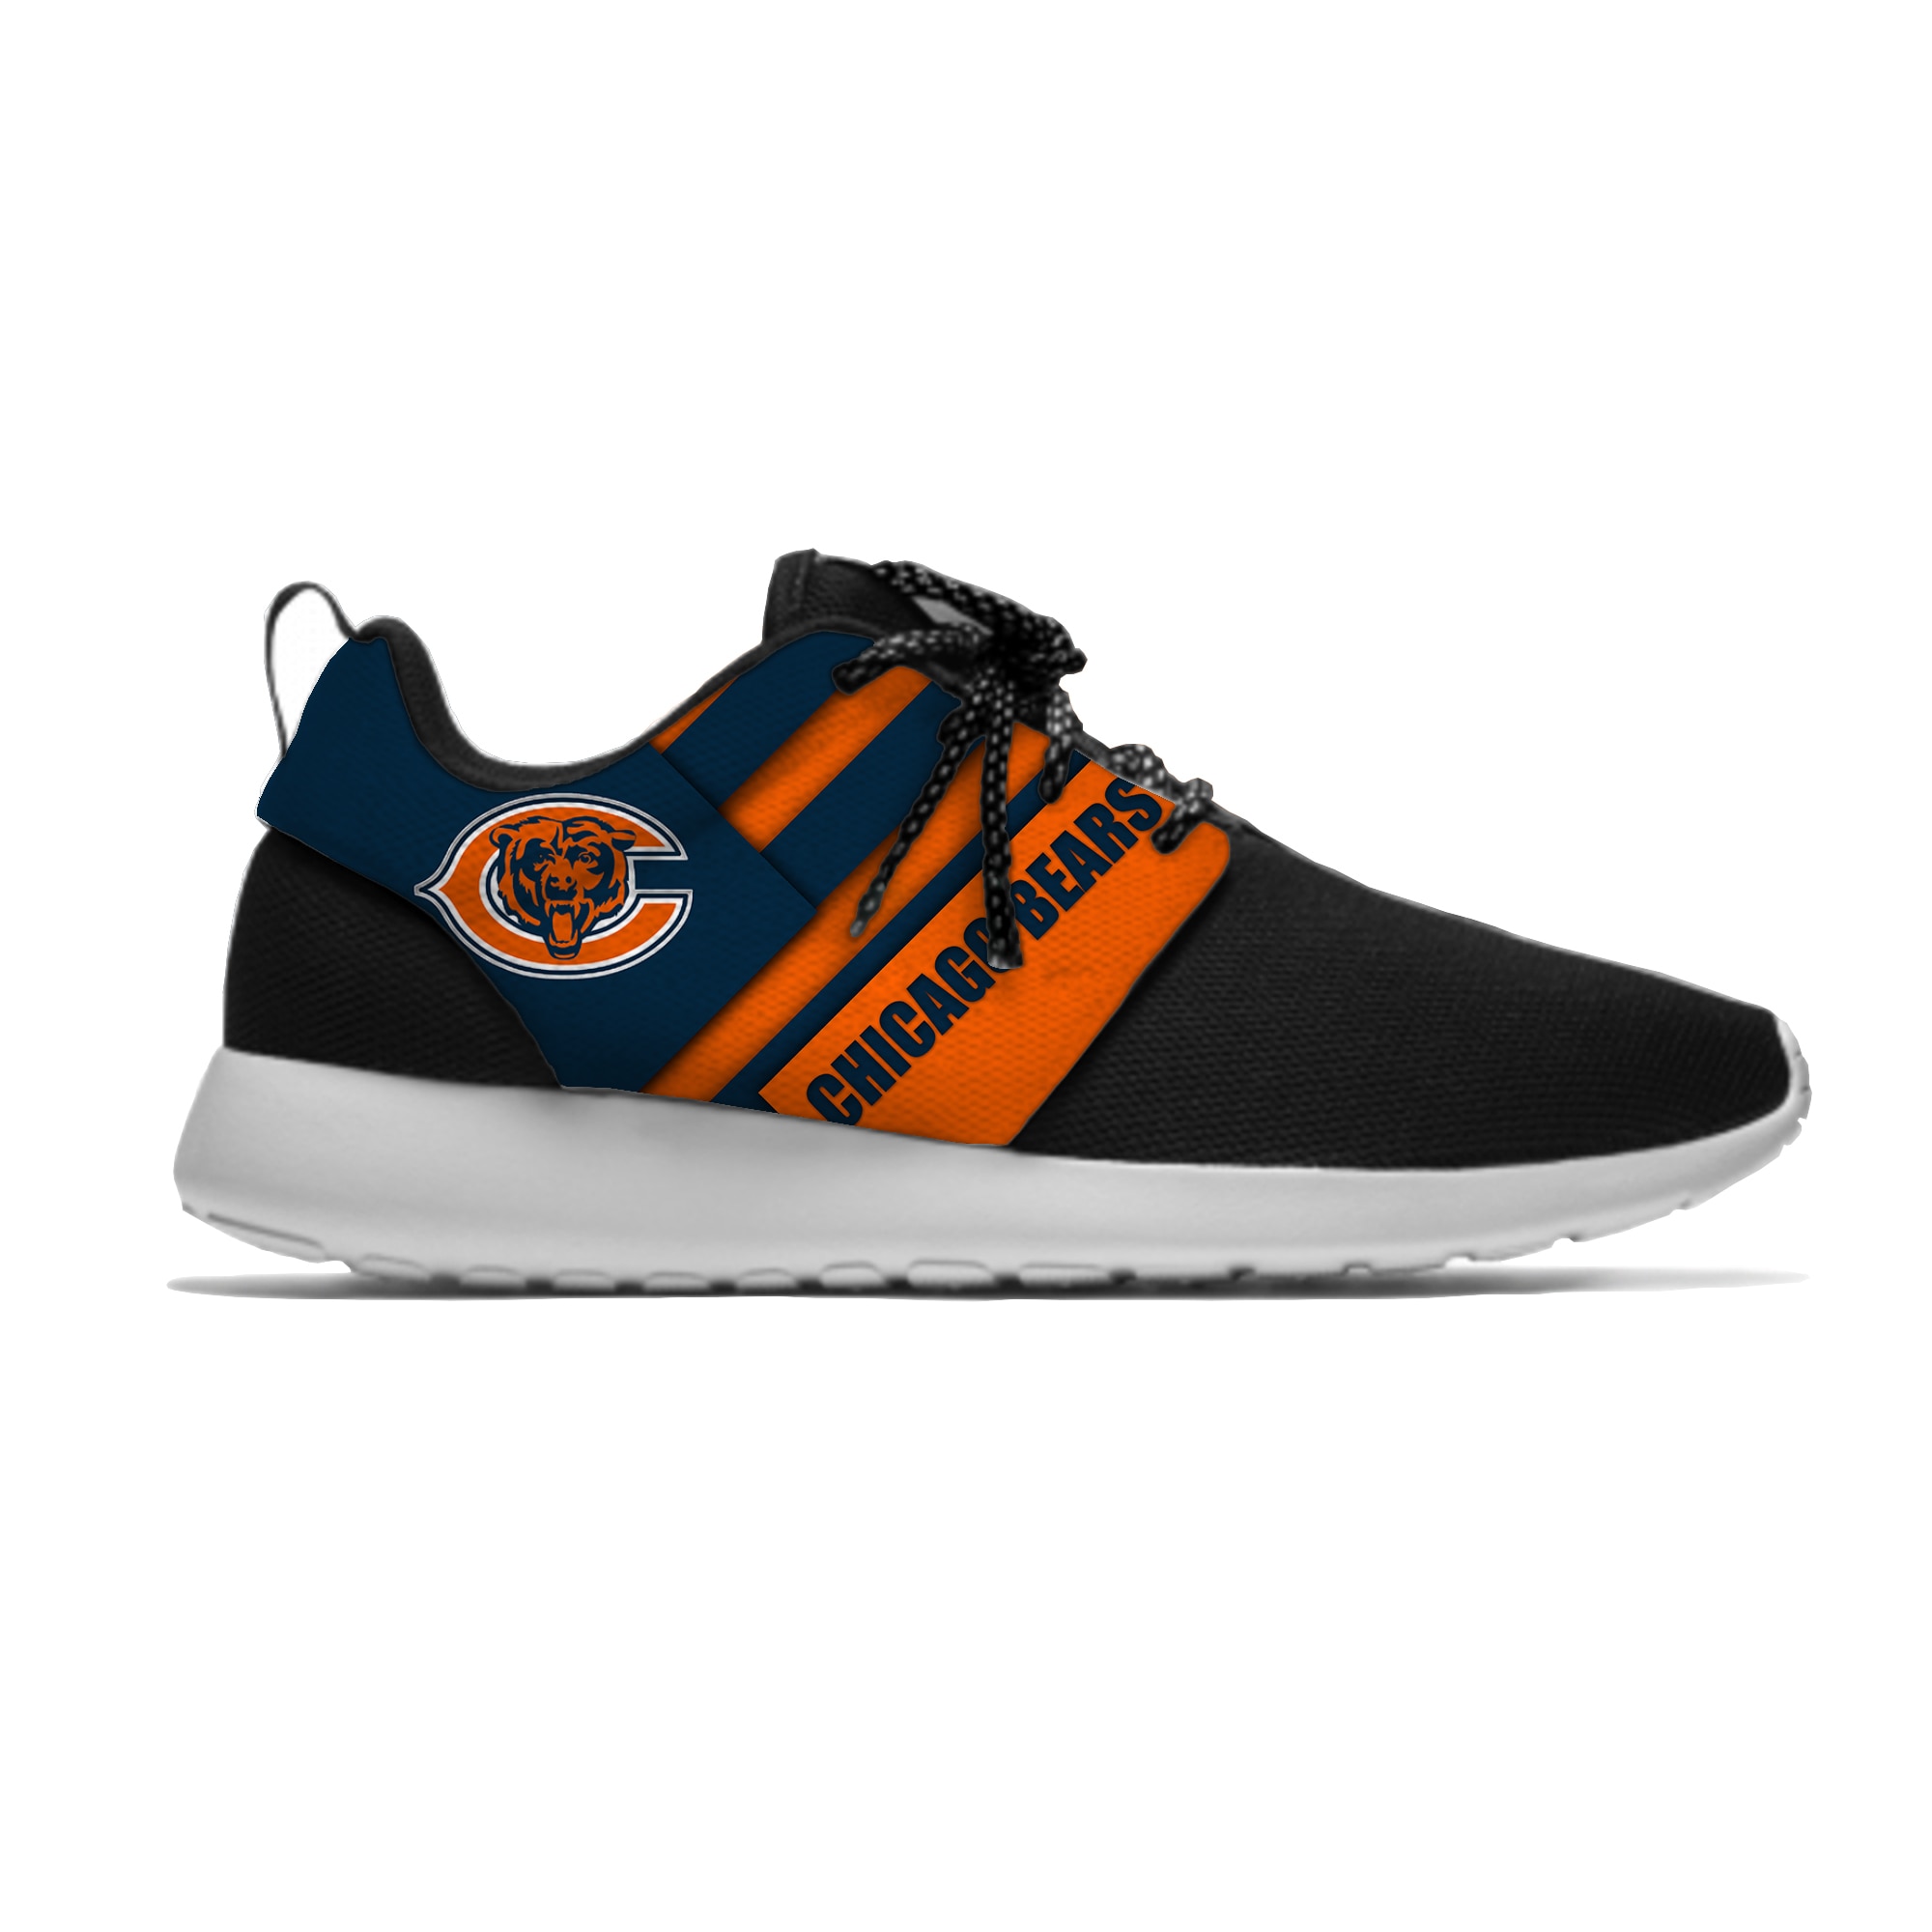 Chicago Bears Sneaker Lightweight Casual shoes for women